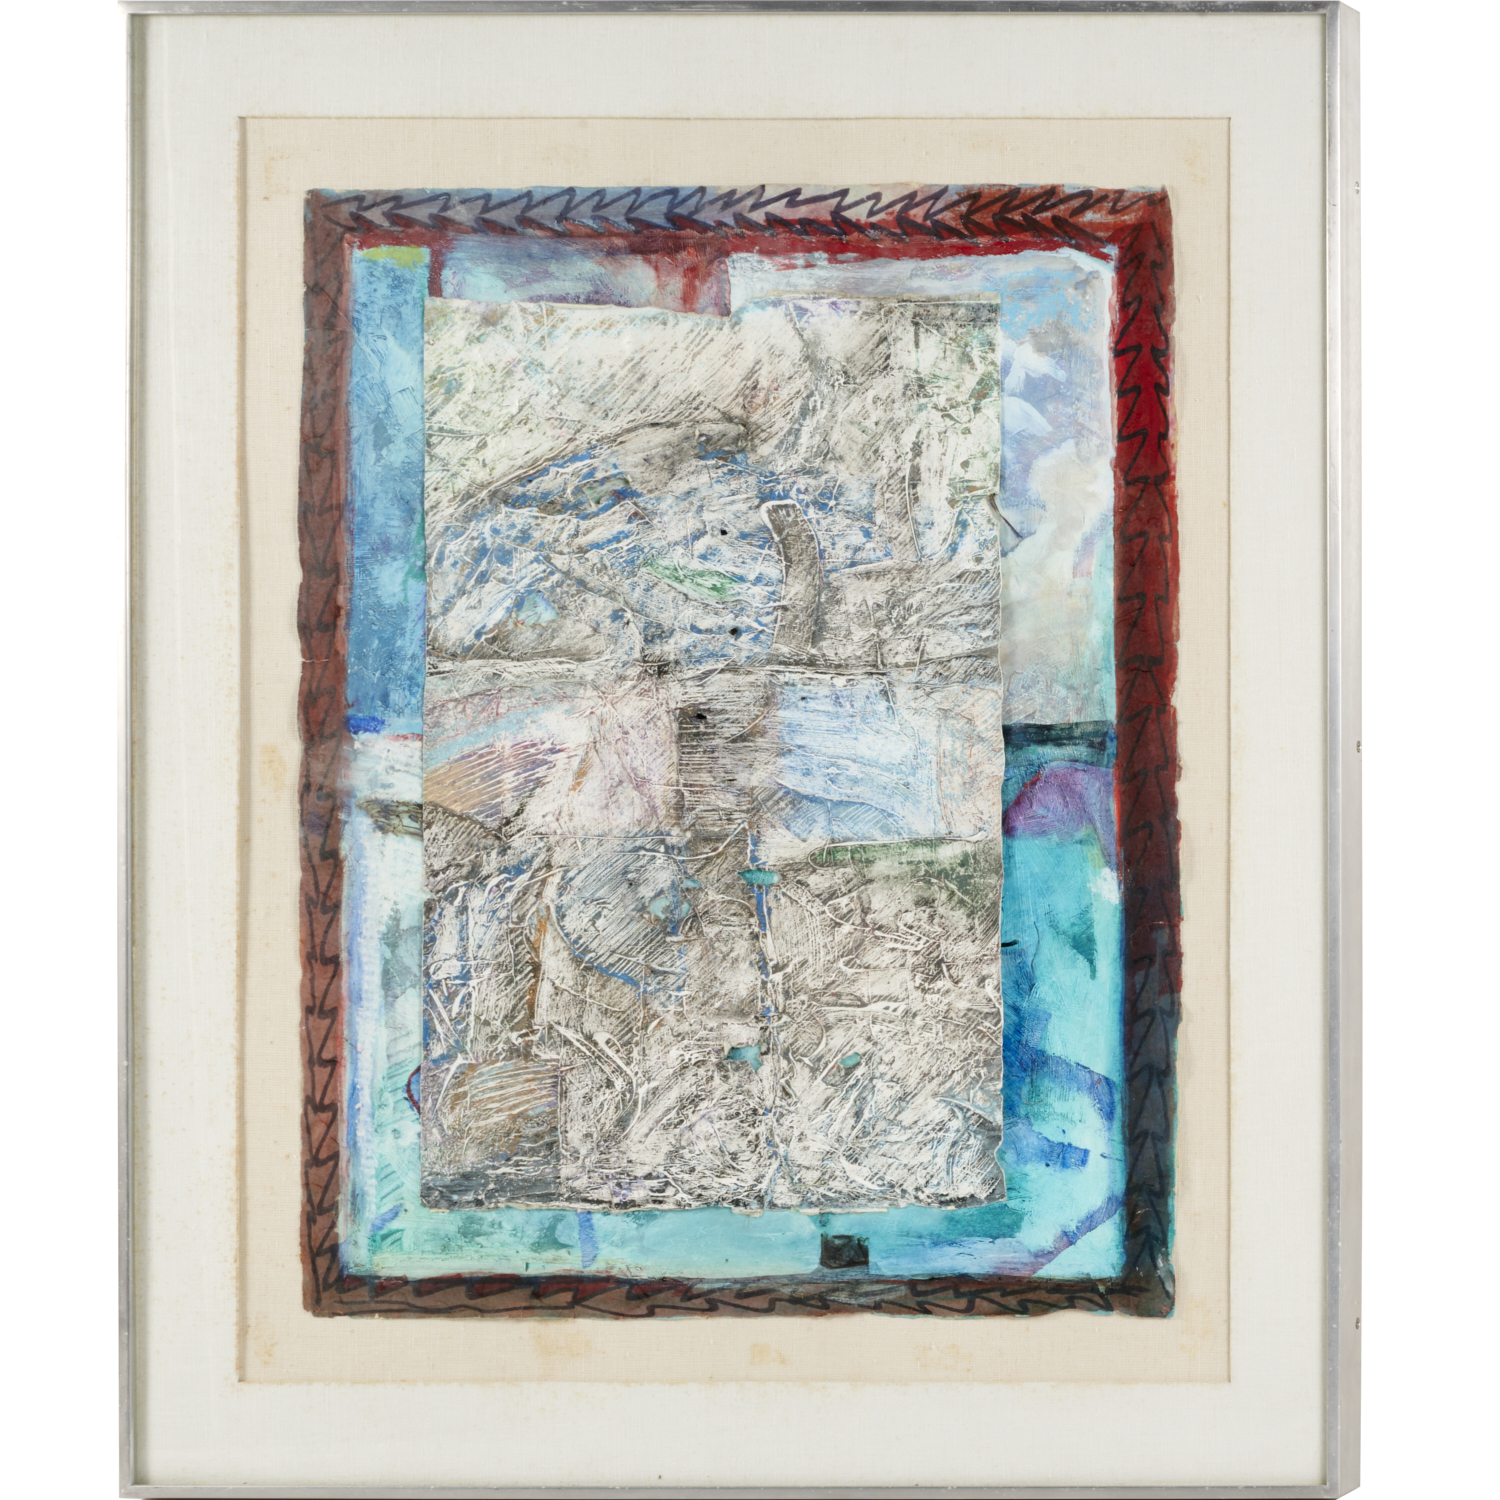 MICHAEL ROSCH, MIXED MEDIA COLLAGE,